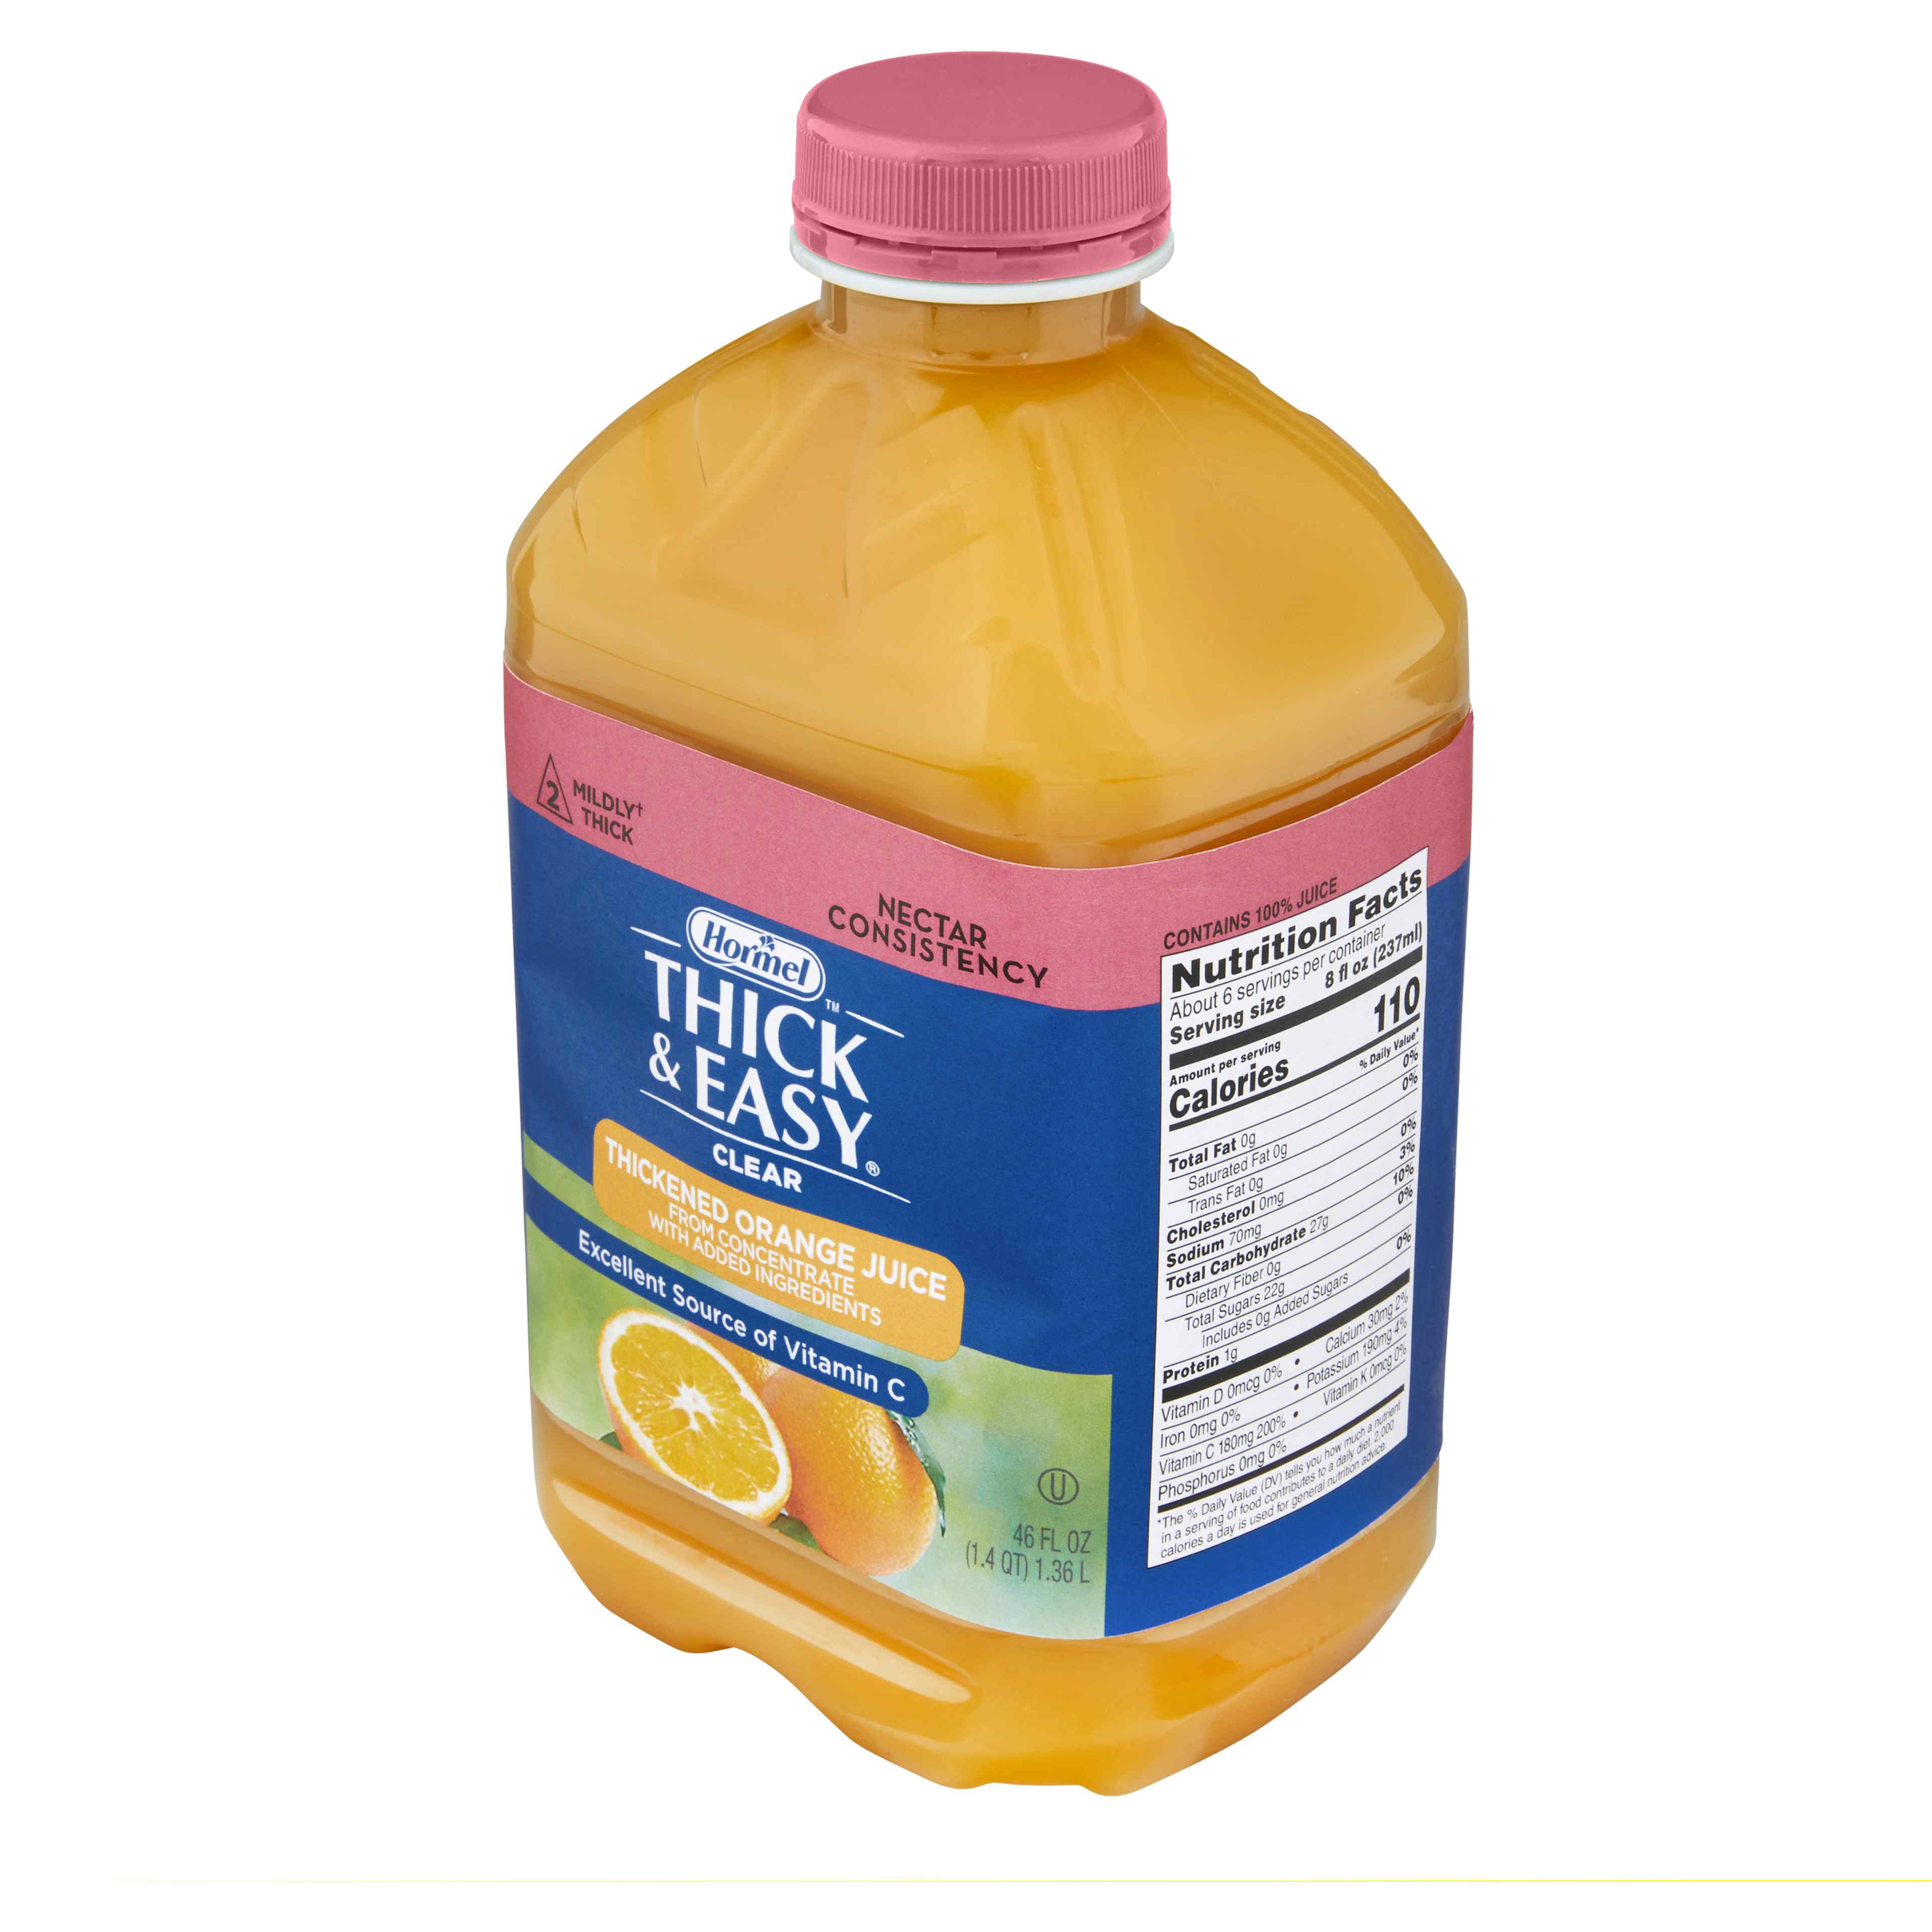 Thick & Easy Ready to Use Thickened Beverage, Orange Juice Flavor, 46 oz., Bottle